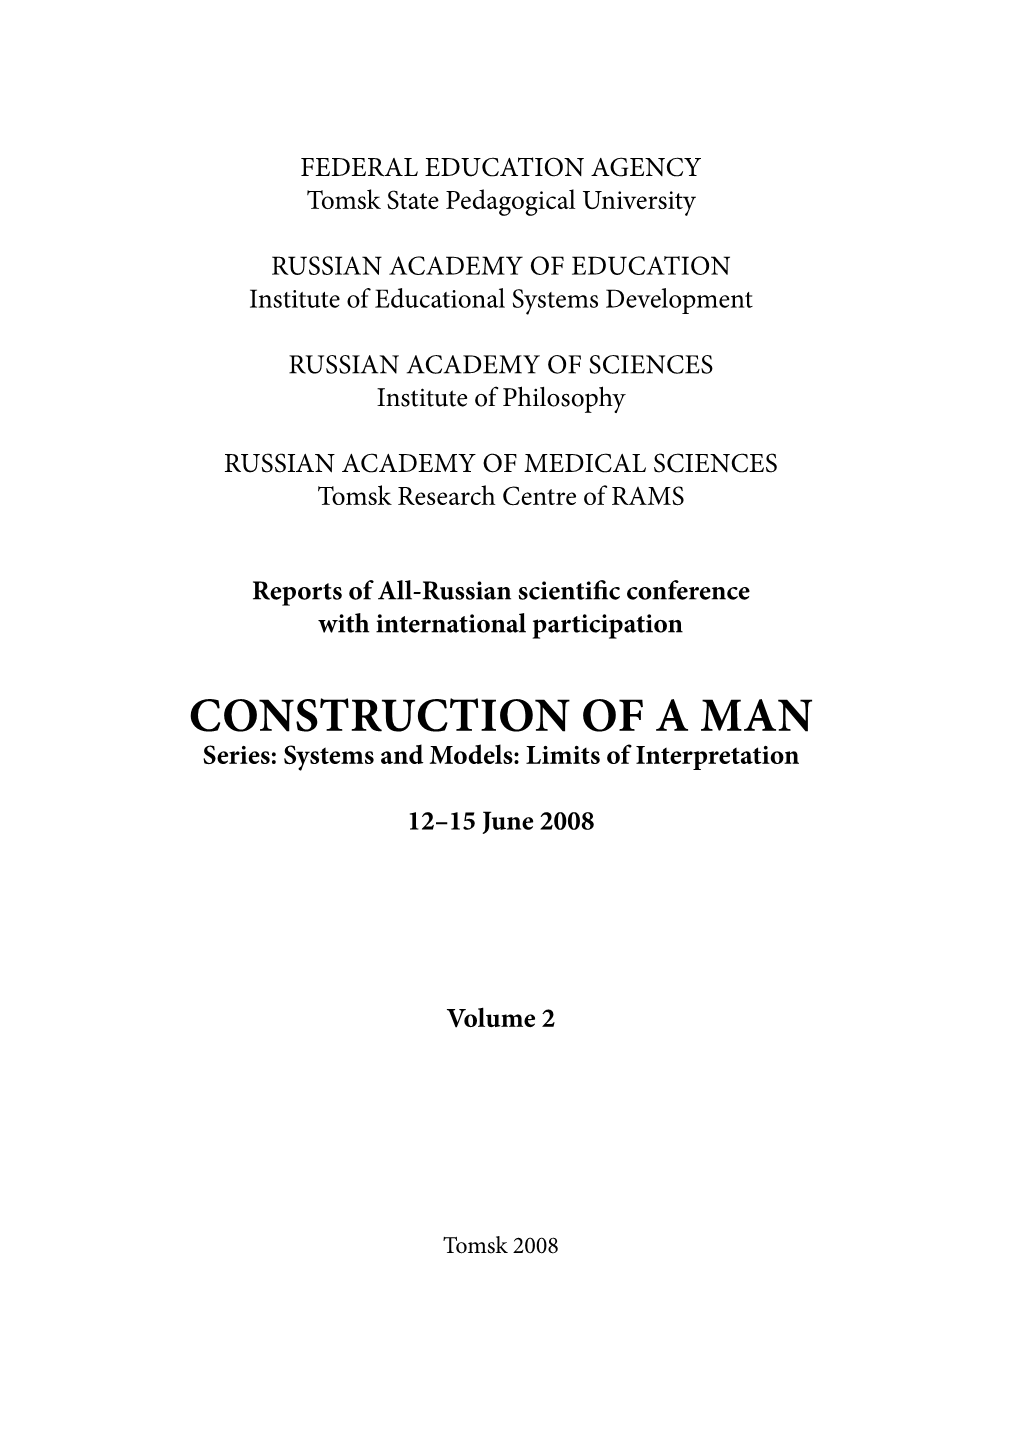 CONSTRUCTION of a MAN Series: Systems and Models: Limits of Interpretation